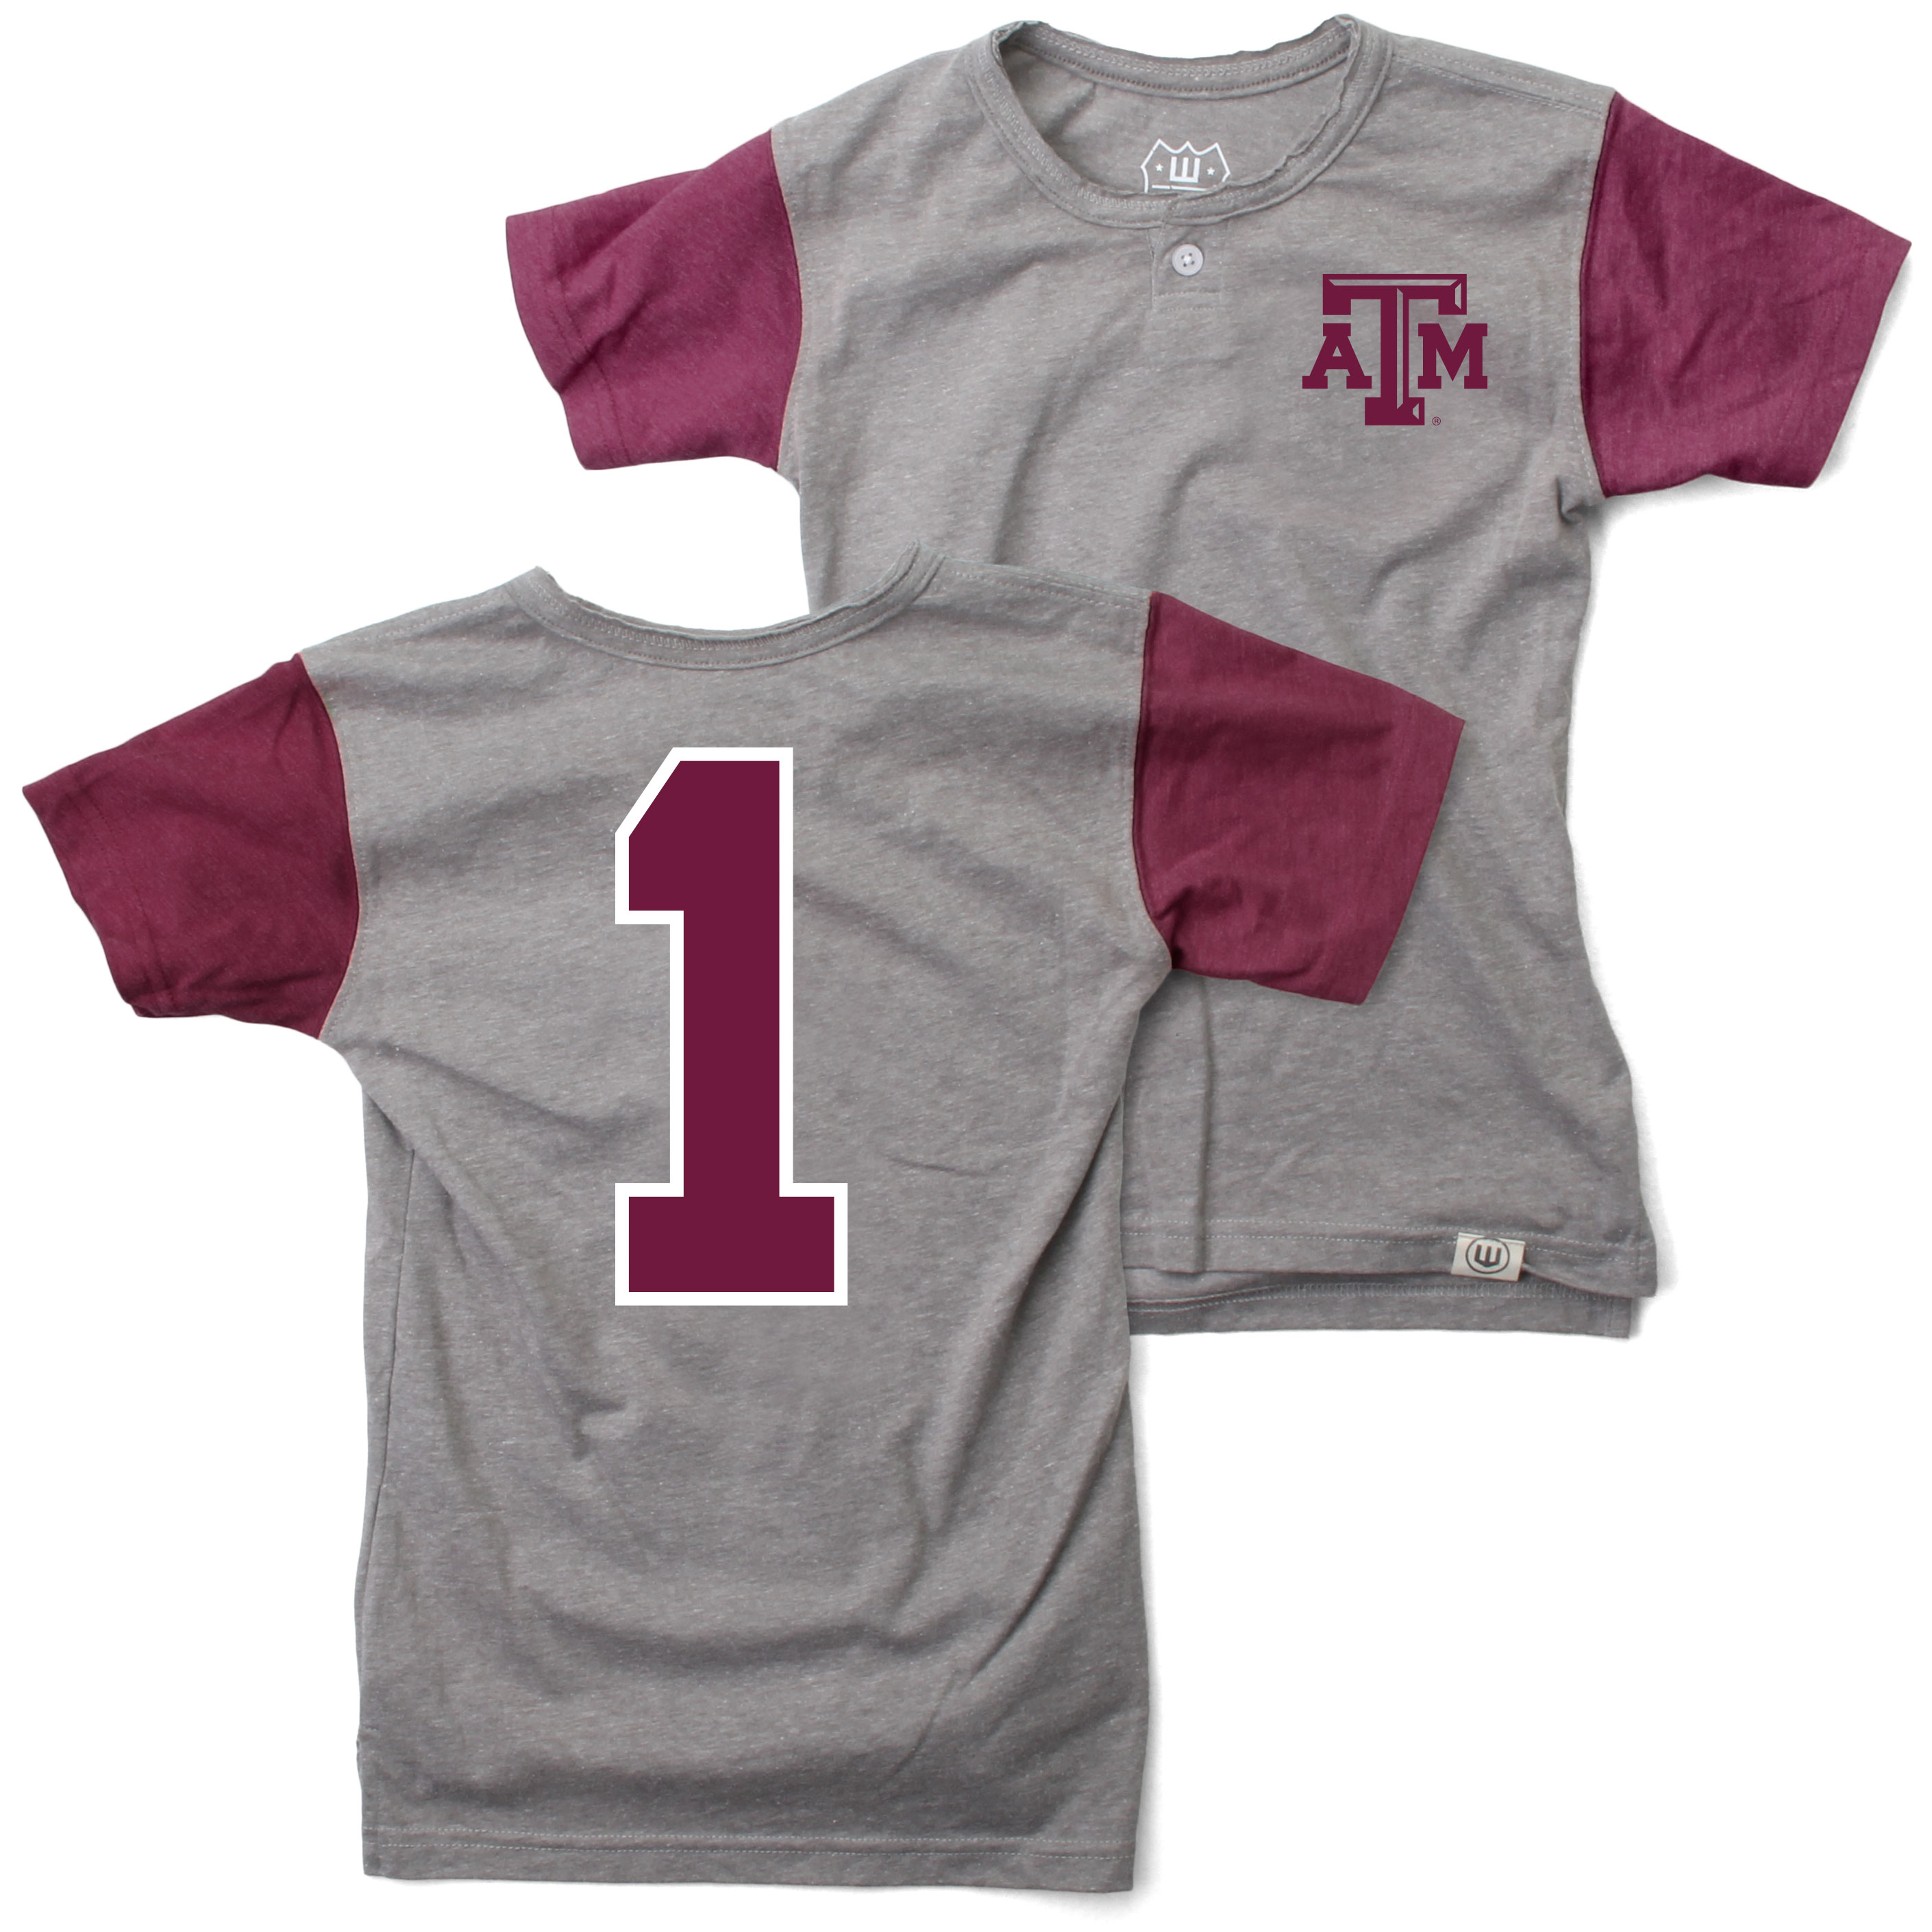 Wes And Willy Texas A&M Aggies Boys Short Sleeve Baseball Henley T-Shirt